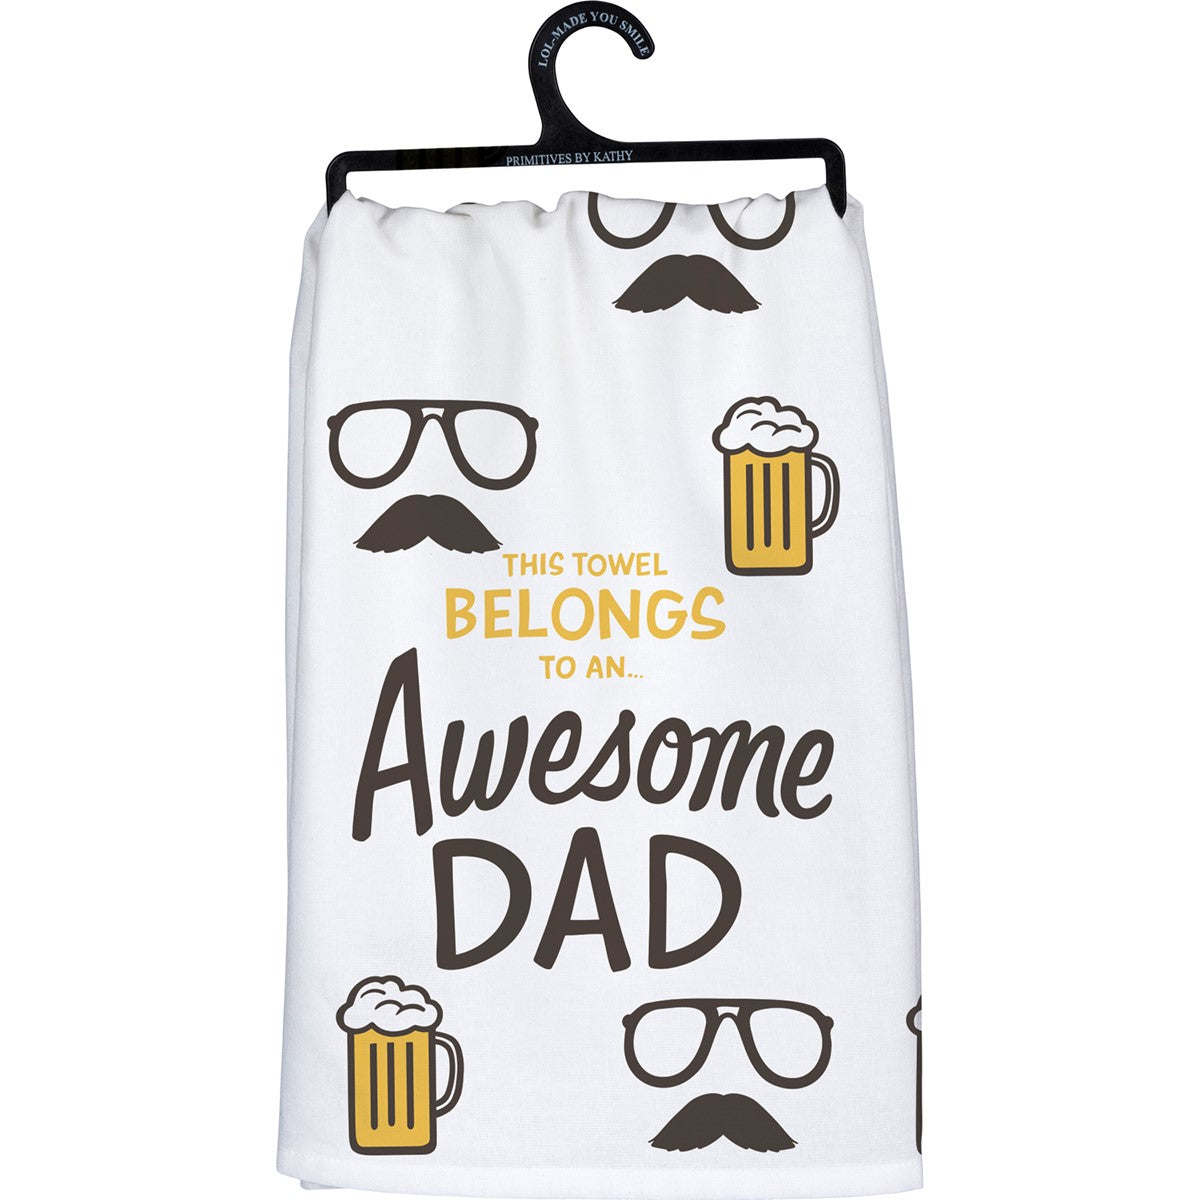 Awesome Dad Kitchen Towel